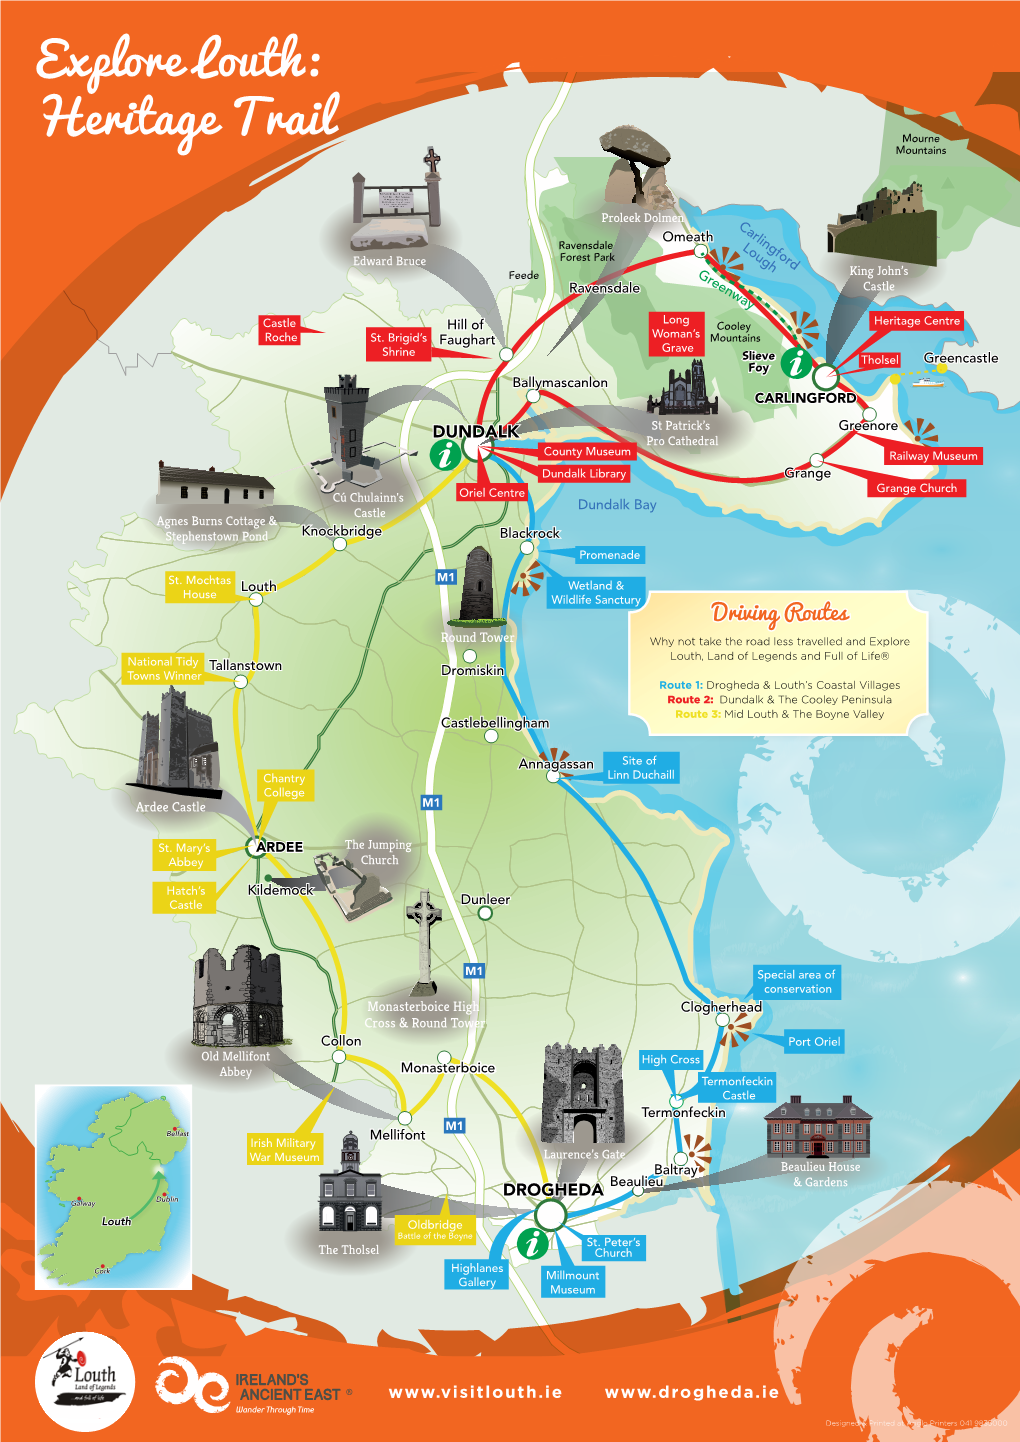 Explore Louth: Heritage Trail Routes Route 2: Dundalk & the Cooley Peninsula Route 3: Mid Louth & the Boyne Valley